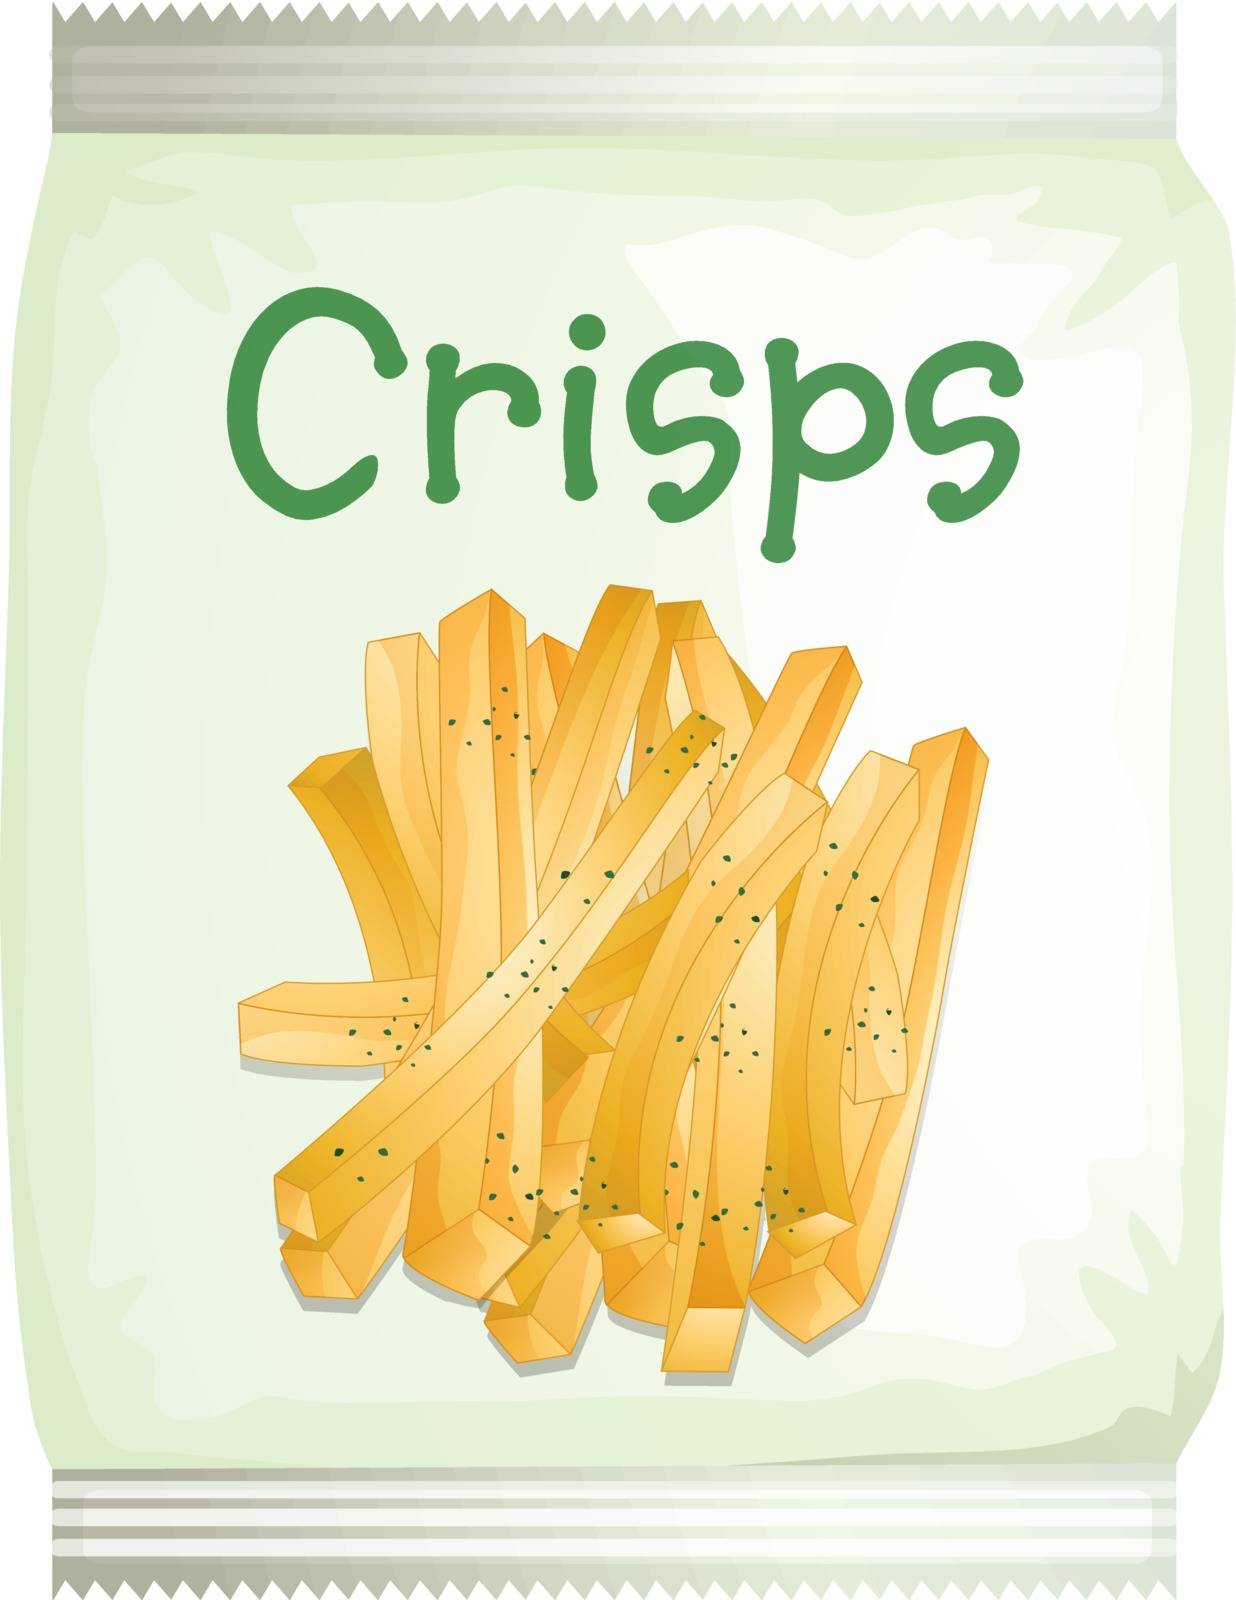 Illustration of a packet of frech fries on a white background